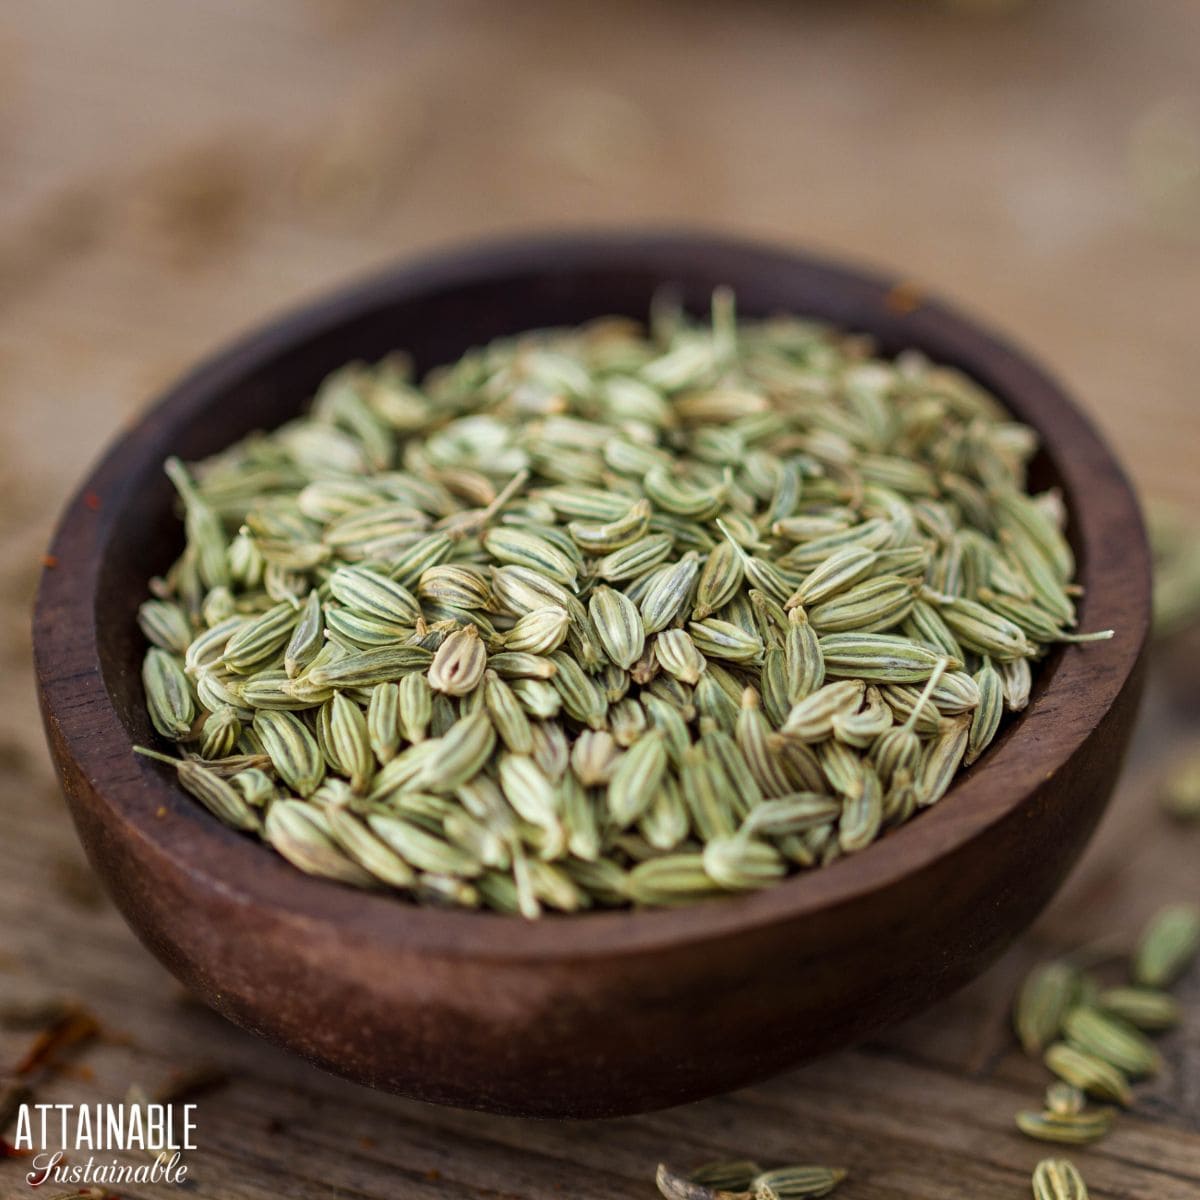 Fennel seeds in a wood bowl.